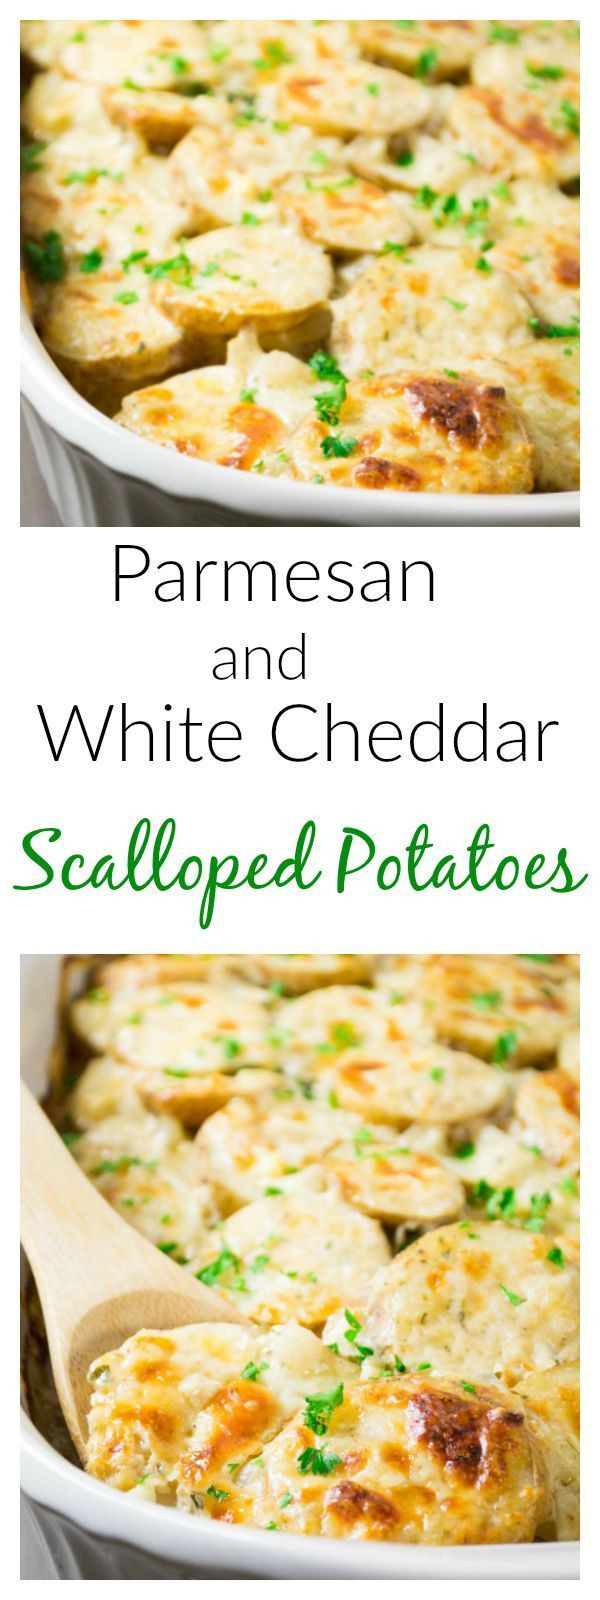 Gourmet Scalloped Potatoes
 parmesan and white cheddar scalloped potatoes